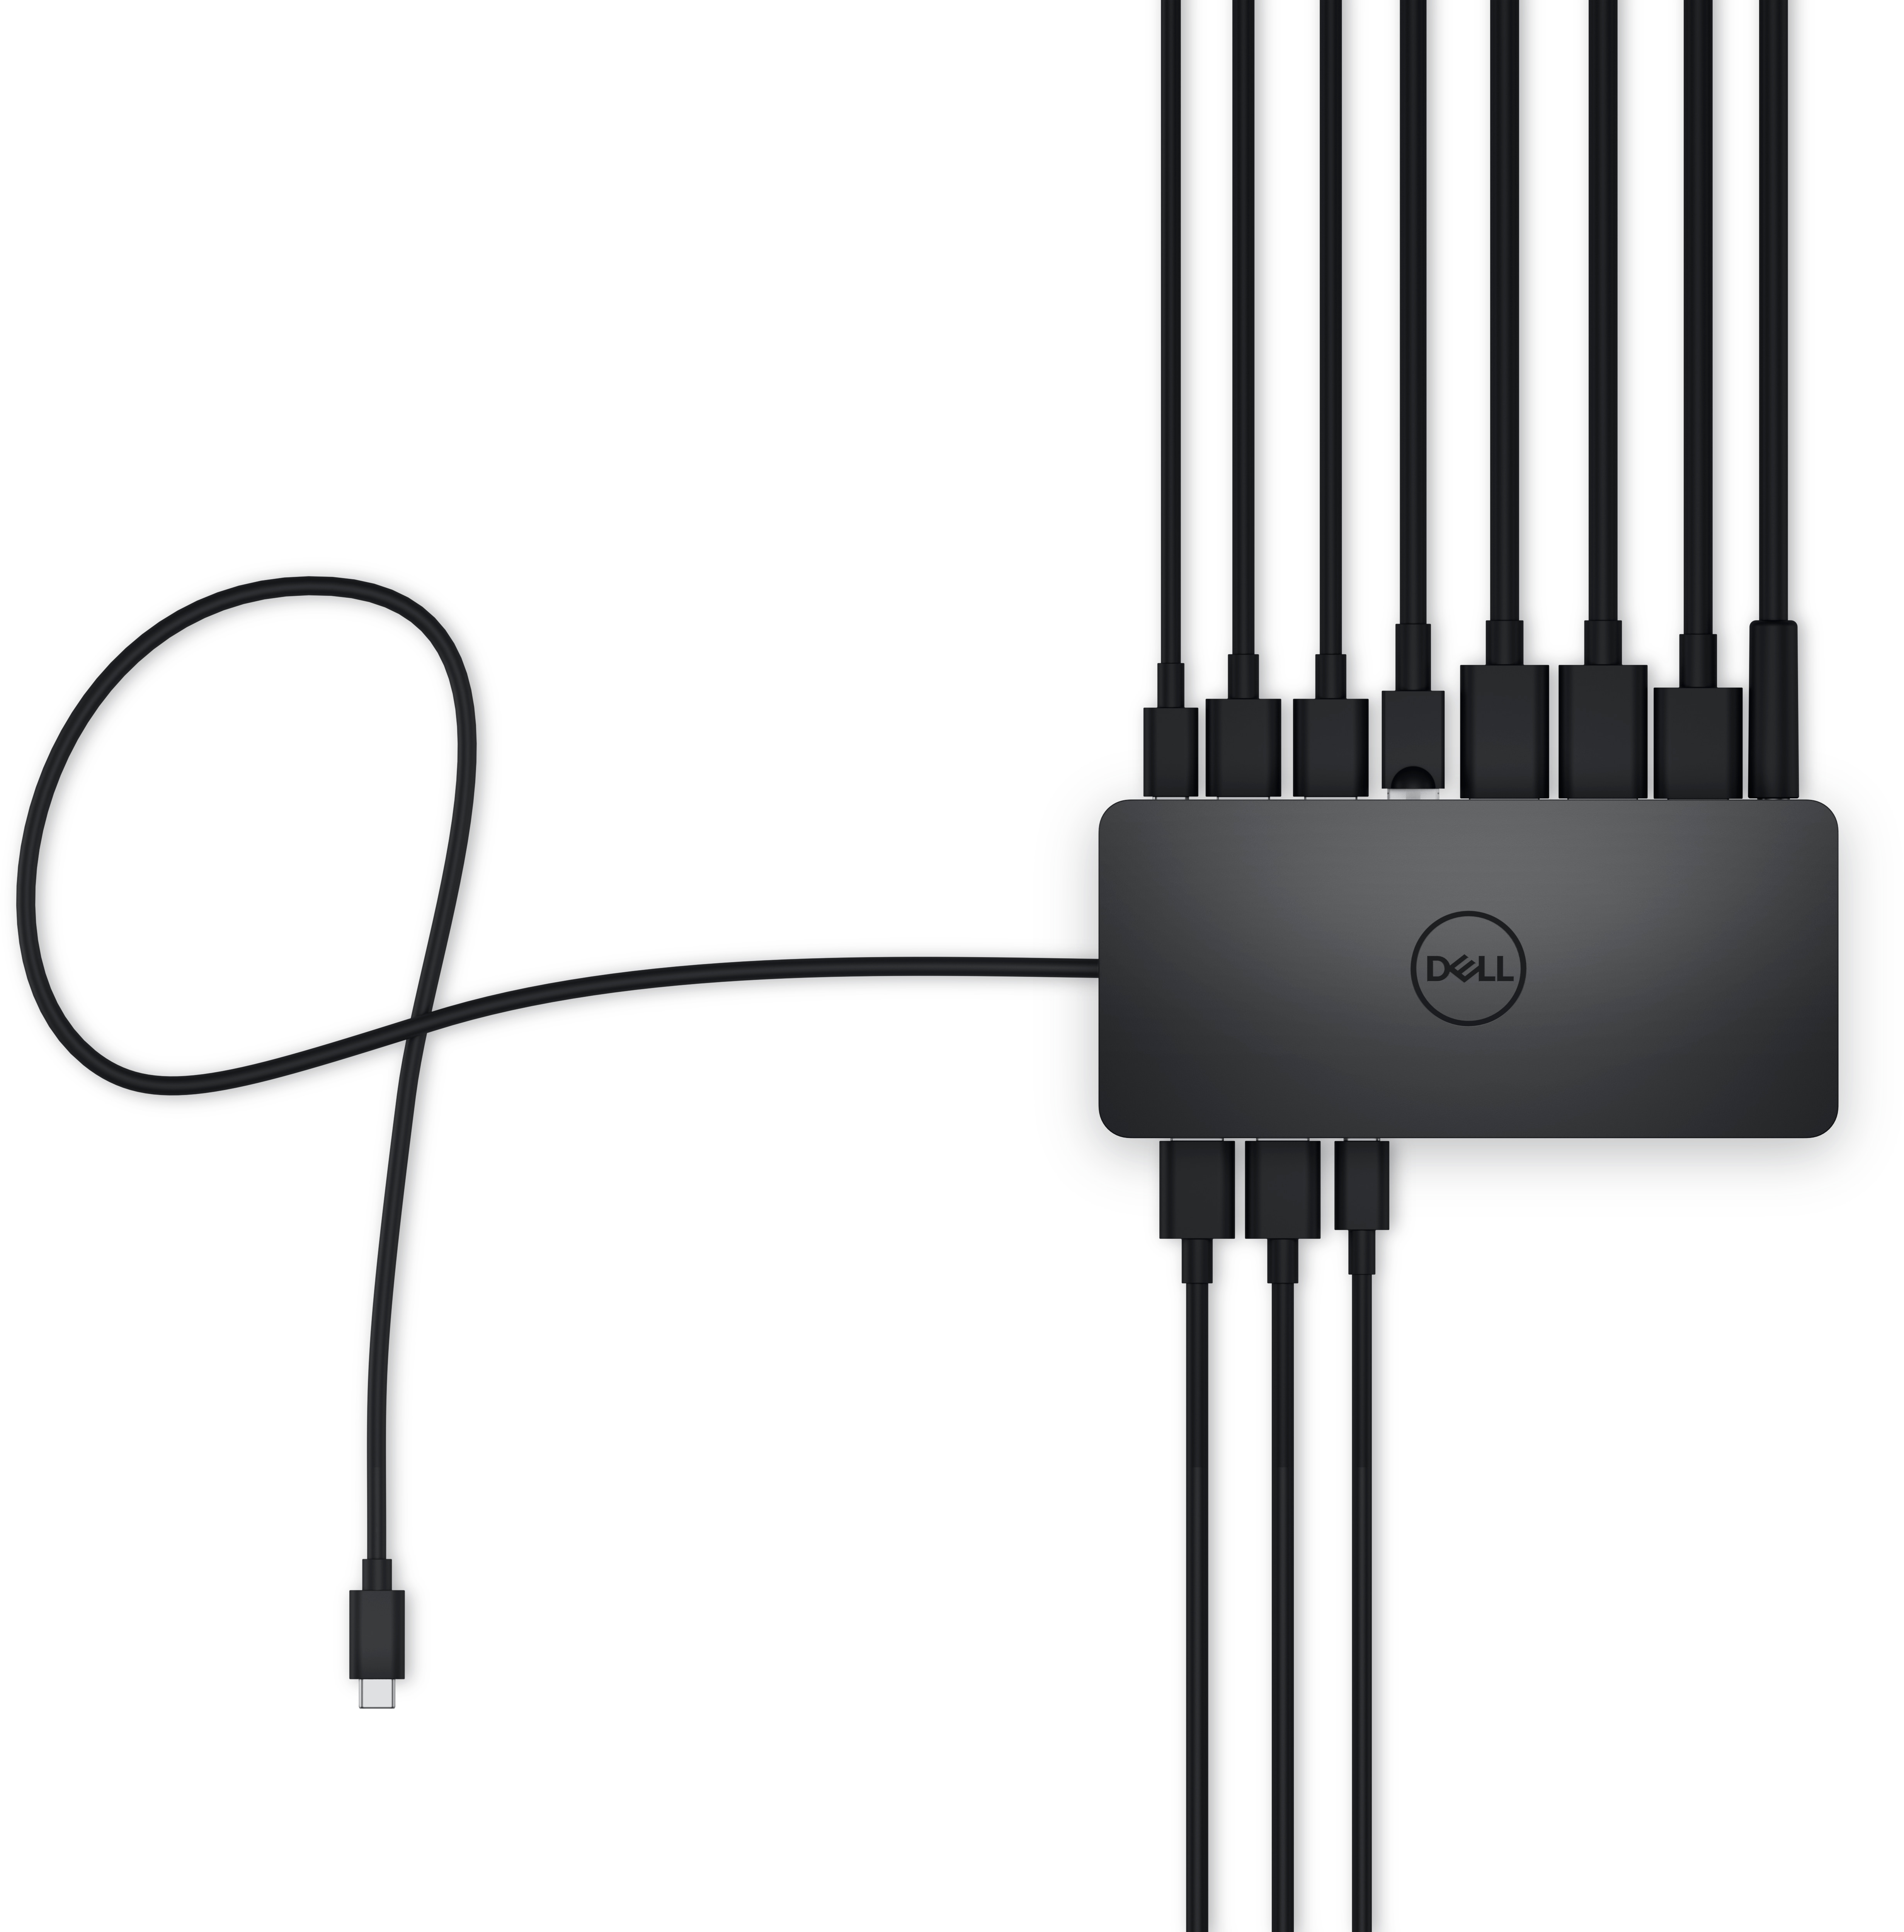 UD22 - Dell Universal Dock - 96w Power Delivery, 4 X 4k with Displaylink  Software, 6 USB Ports